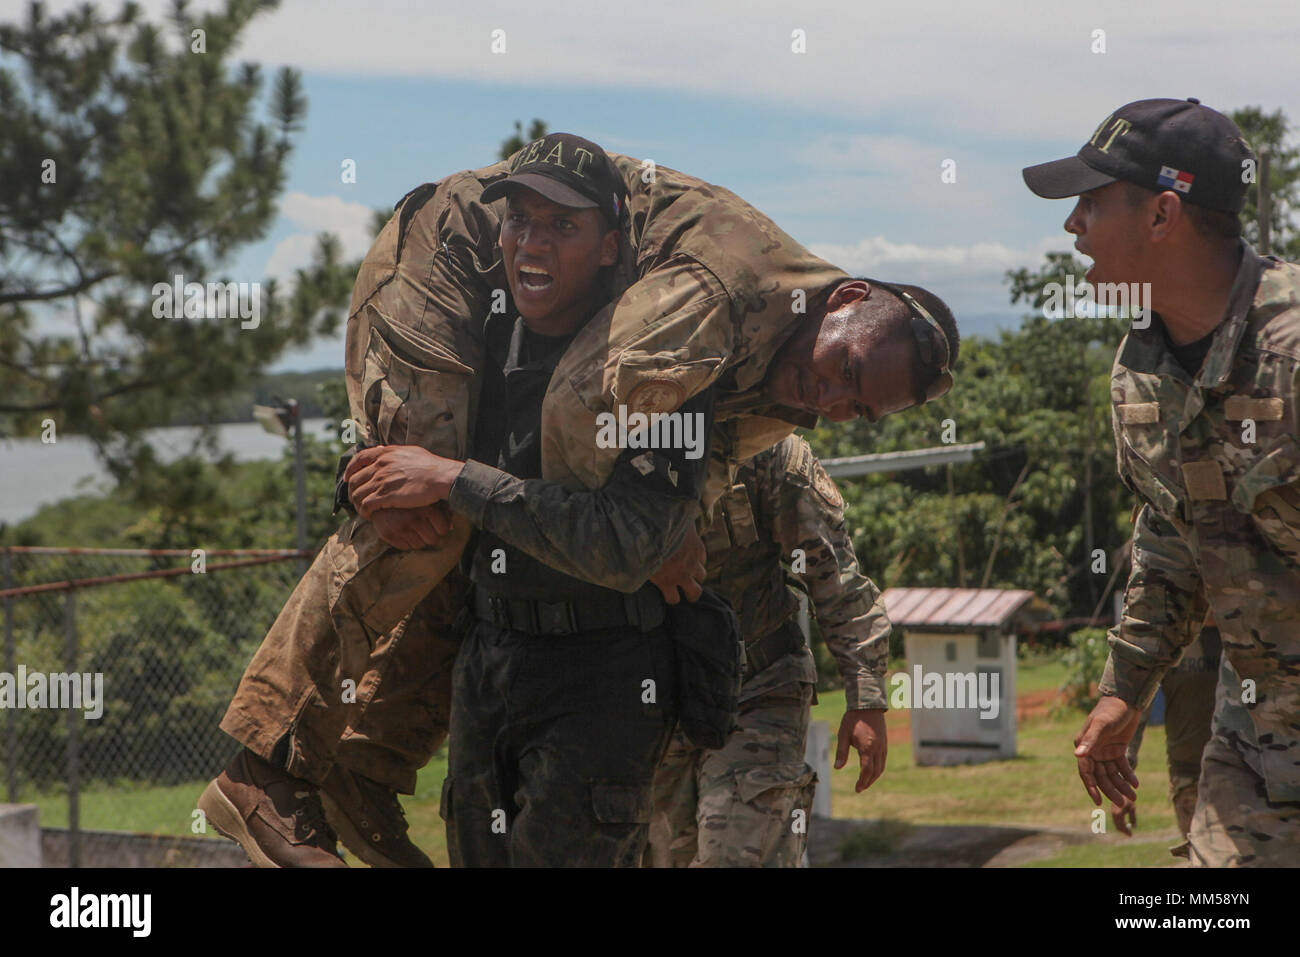 Panamanian Institutional Protection Service Cpl. Fernando A. Jaramillo, right, motivates Cpl. Jose A. Diaz, left, also assigned to ISP, while Diaz carries Cpl. Alexander Camero, an infantryman assigned to the Servicio Nacional Aeronaval, during a final exercise of a course conducted by U.S. Marines with Mobile Training Team One, Command Element, Special Purpose Marine Air-Ground Task Force - Southern Command, at Agustin Santos Vinda Base in Quebrada de Piedra, Panama, Aug. 31, 2017. The MTT conducted a three-week course with Panamanian service members consisting of basic infantry tactics, mark Stock Photo